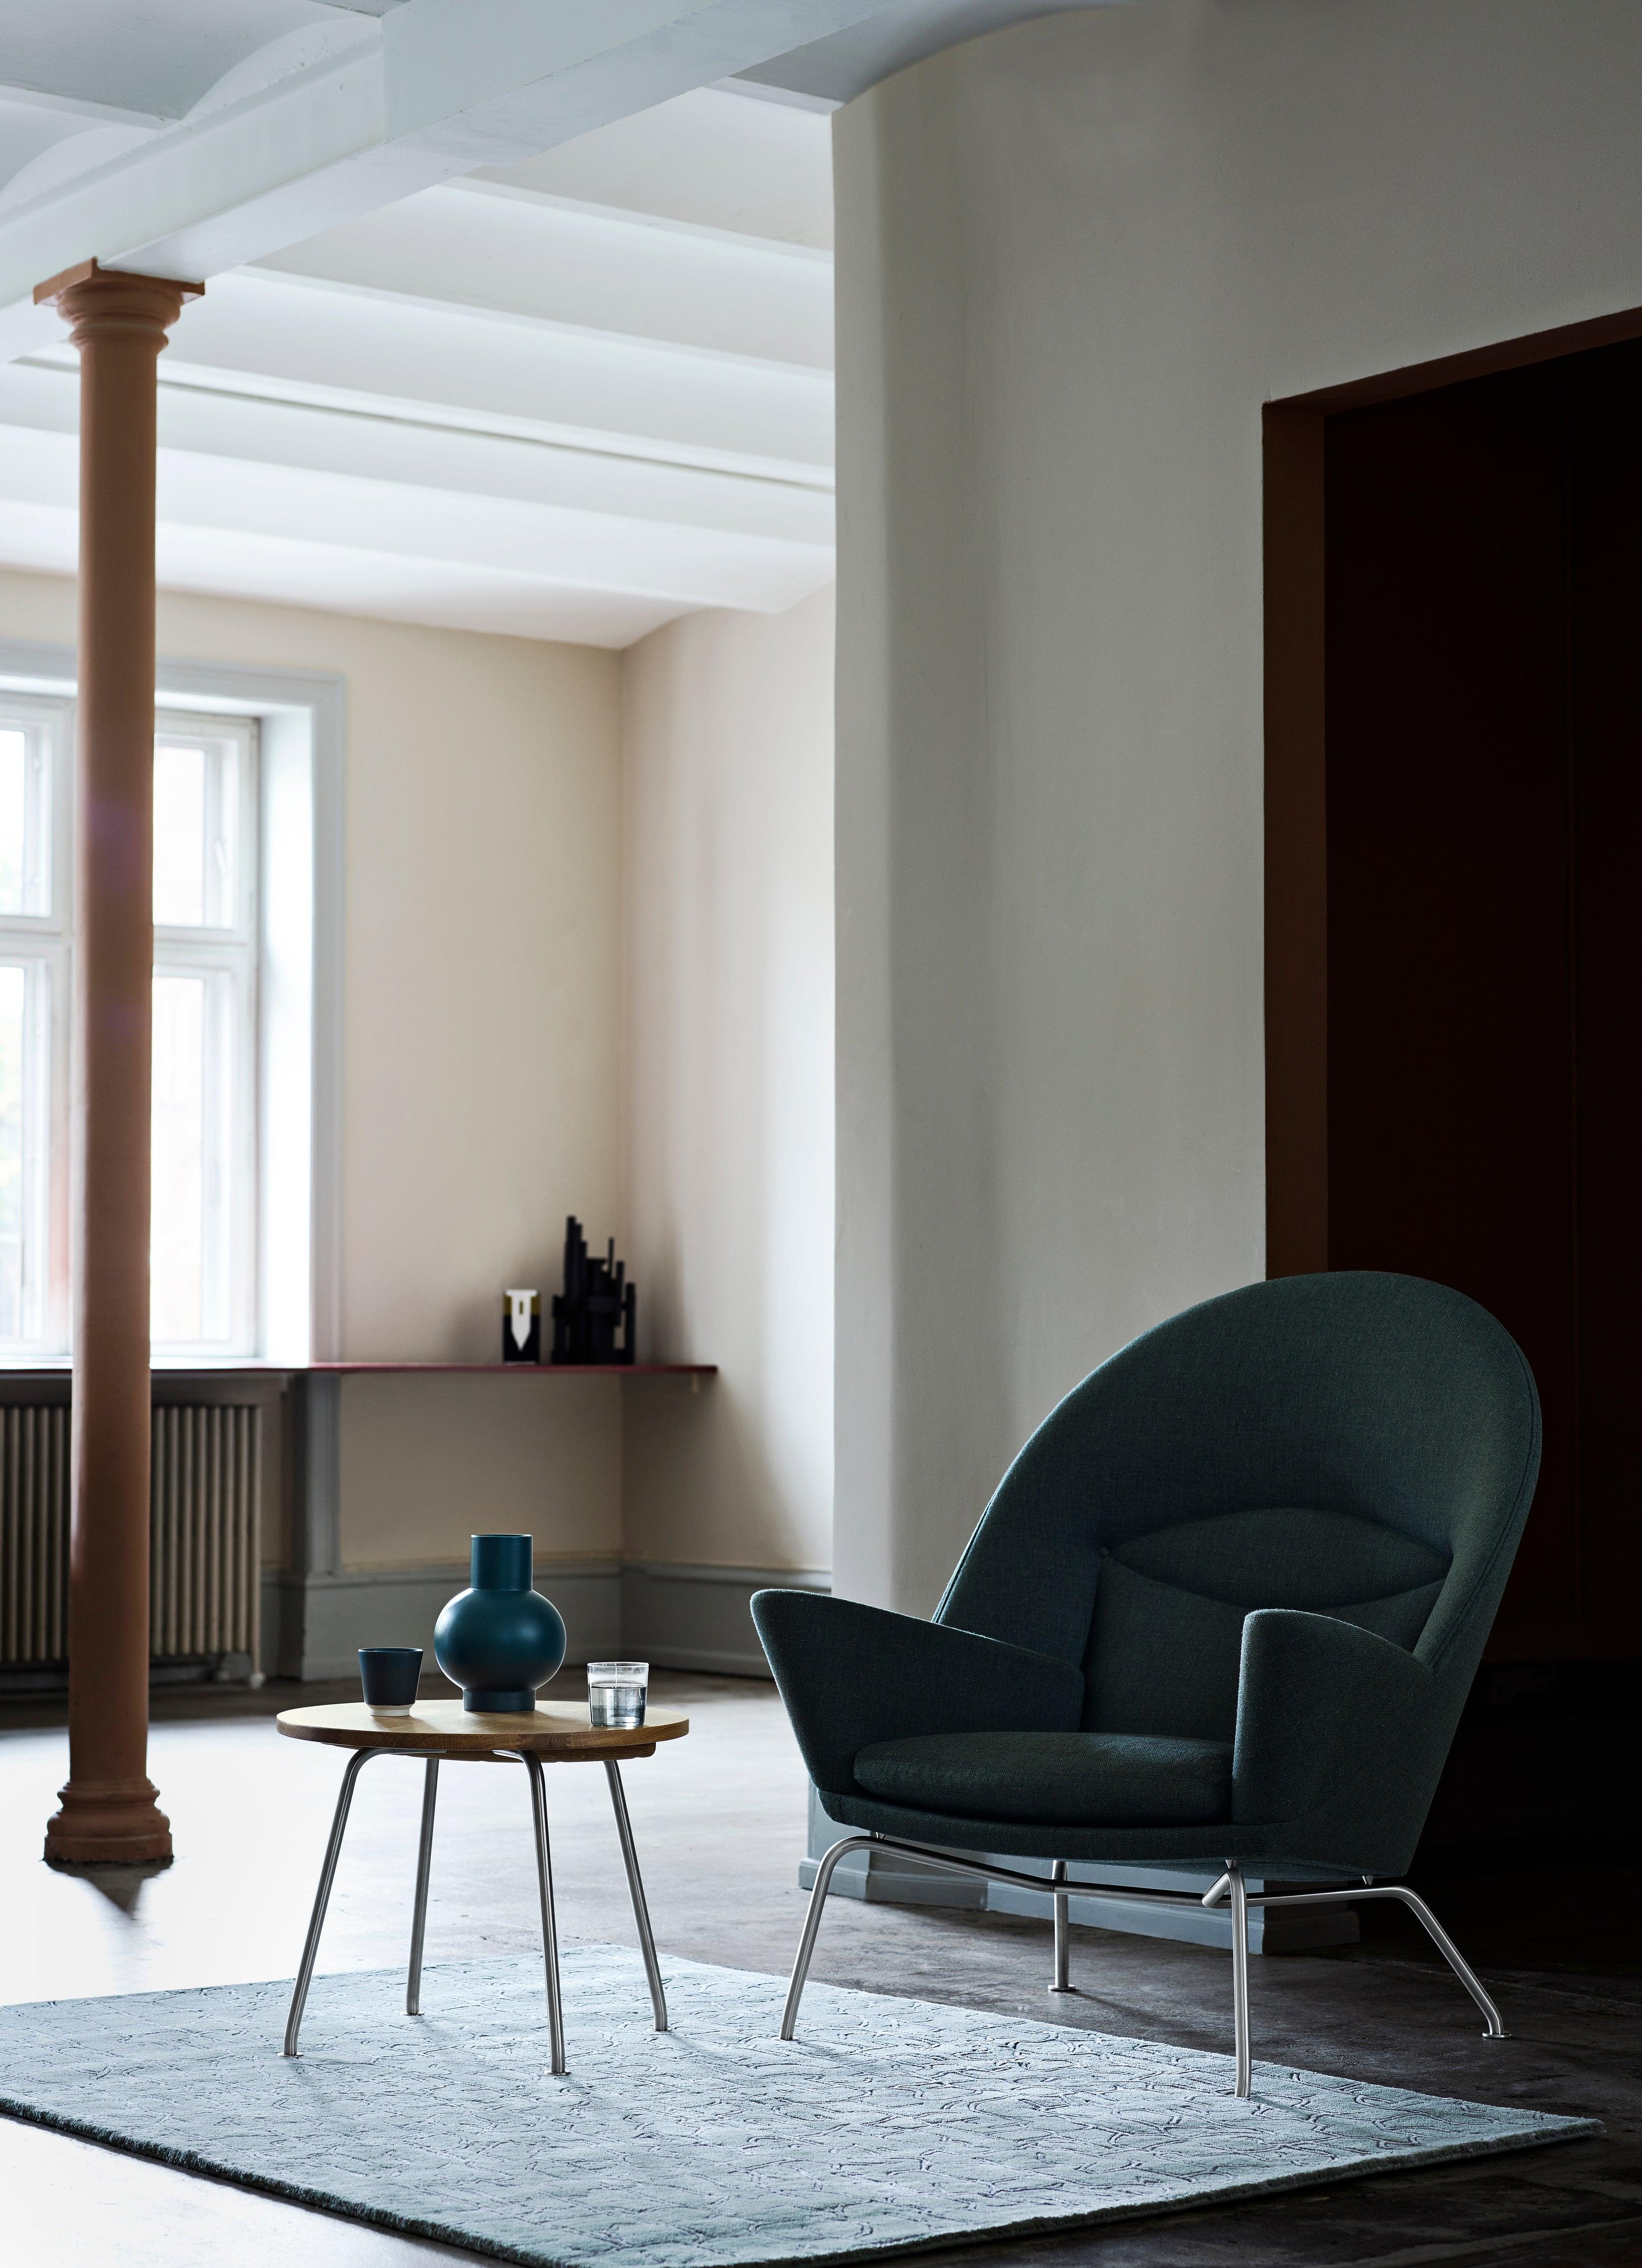 CH468 Oculus Chair in Fiord 191 Fabric Group 3 Seat by Hans J. Wegner 1